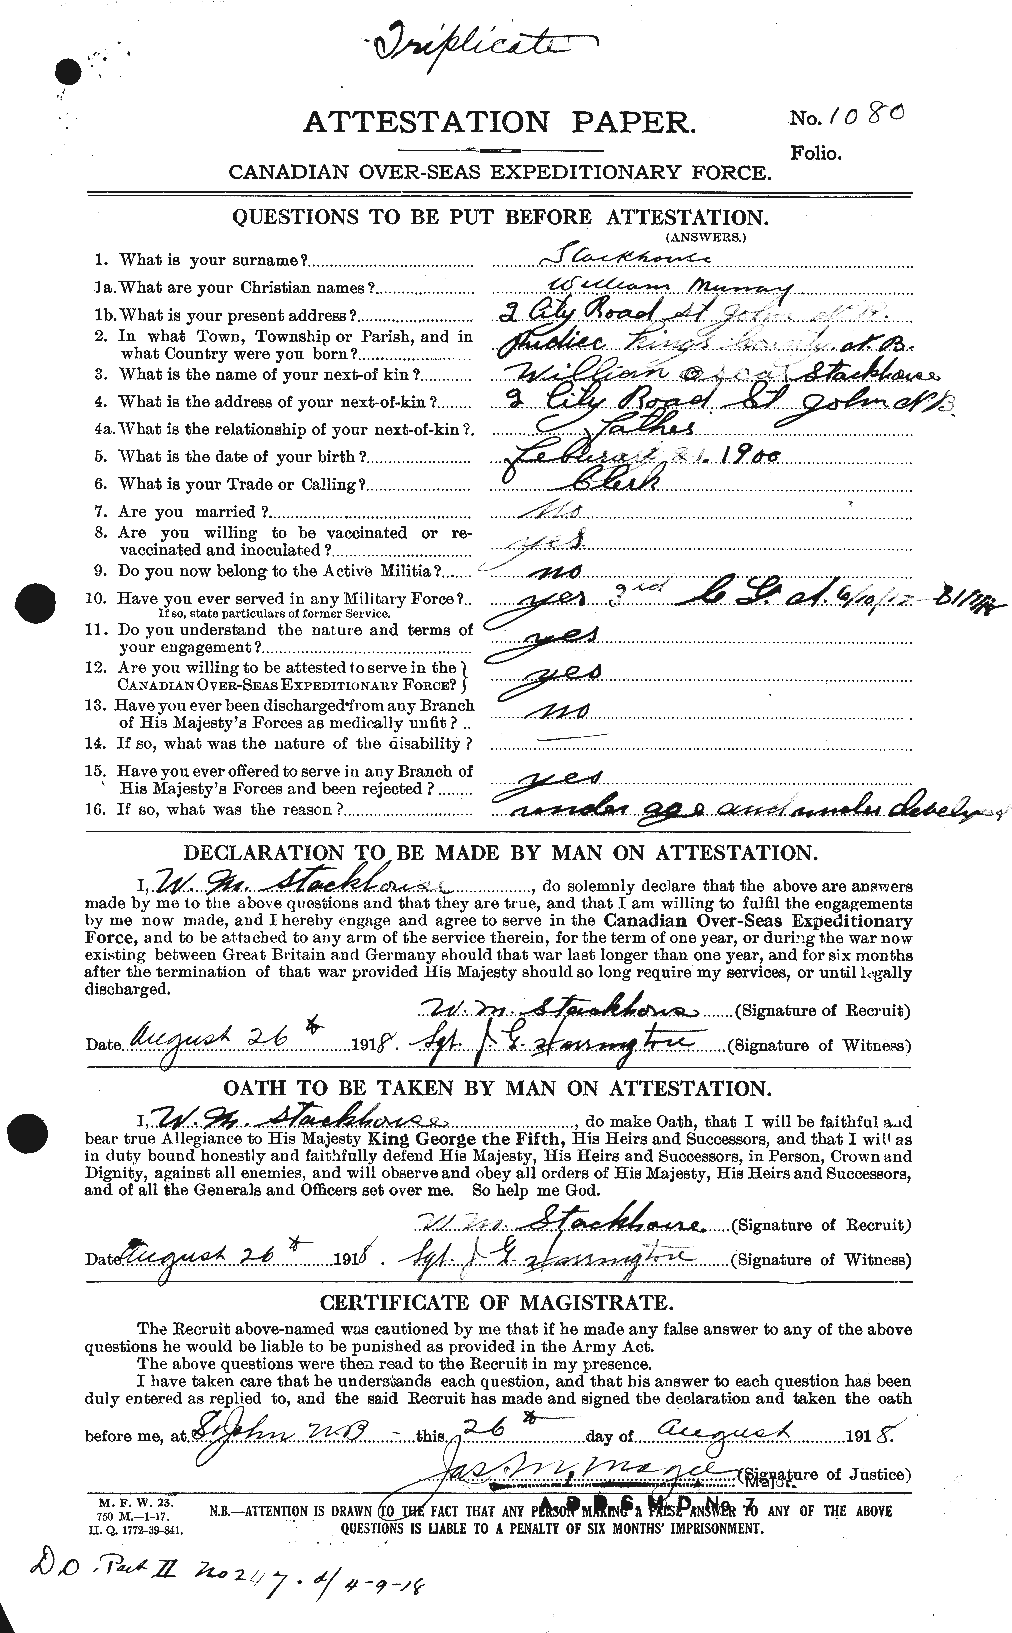 Personnel Records of the First World War - CEF 113536a